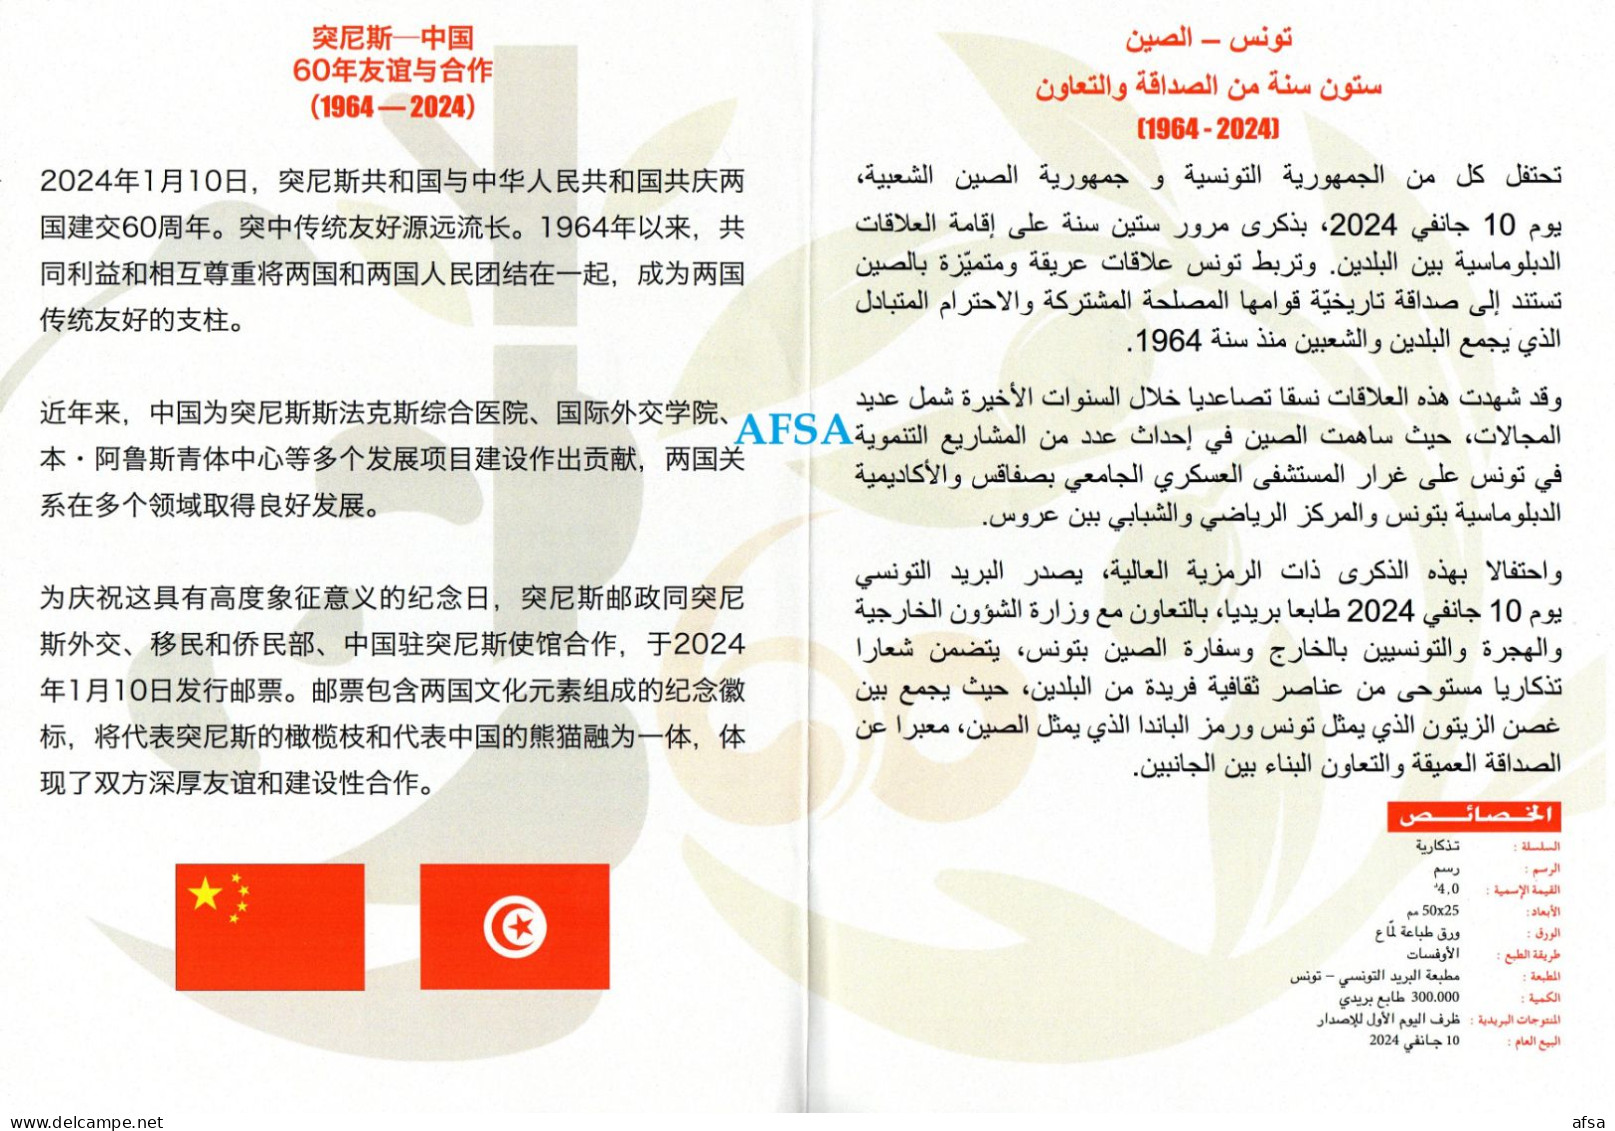 2024-Tunisia -China: Sixty Years Of Friendship And Cooperation (1964-2024) Fleyr In 3 Languages (Arabic-English-Chinese) - Tunisia